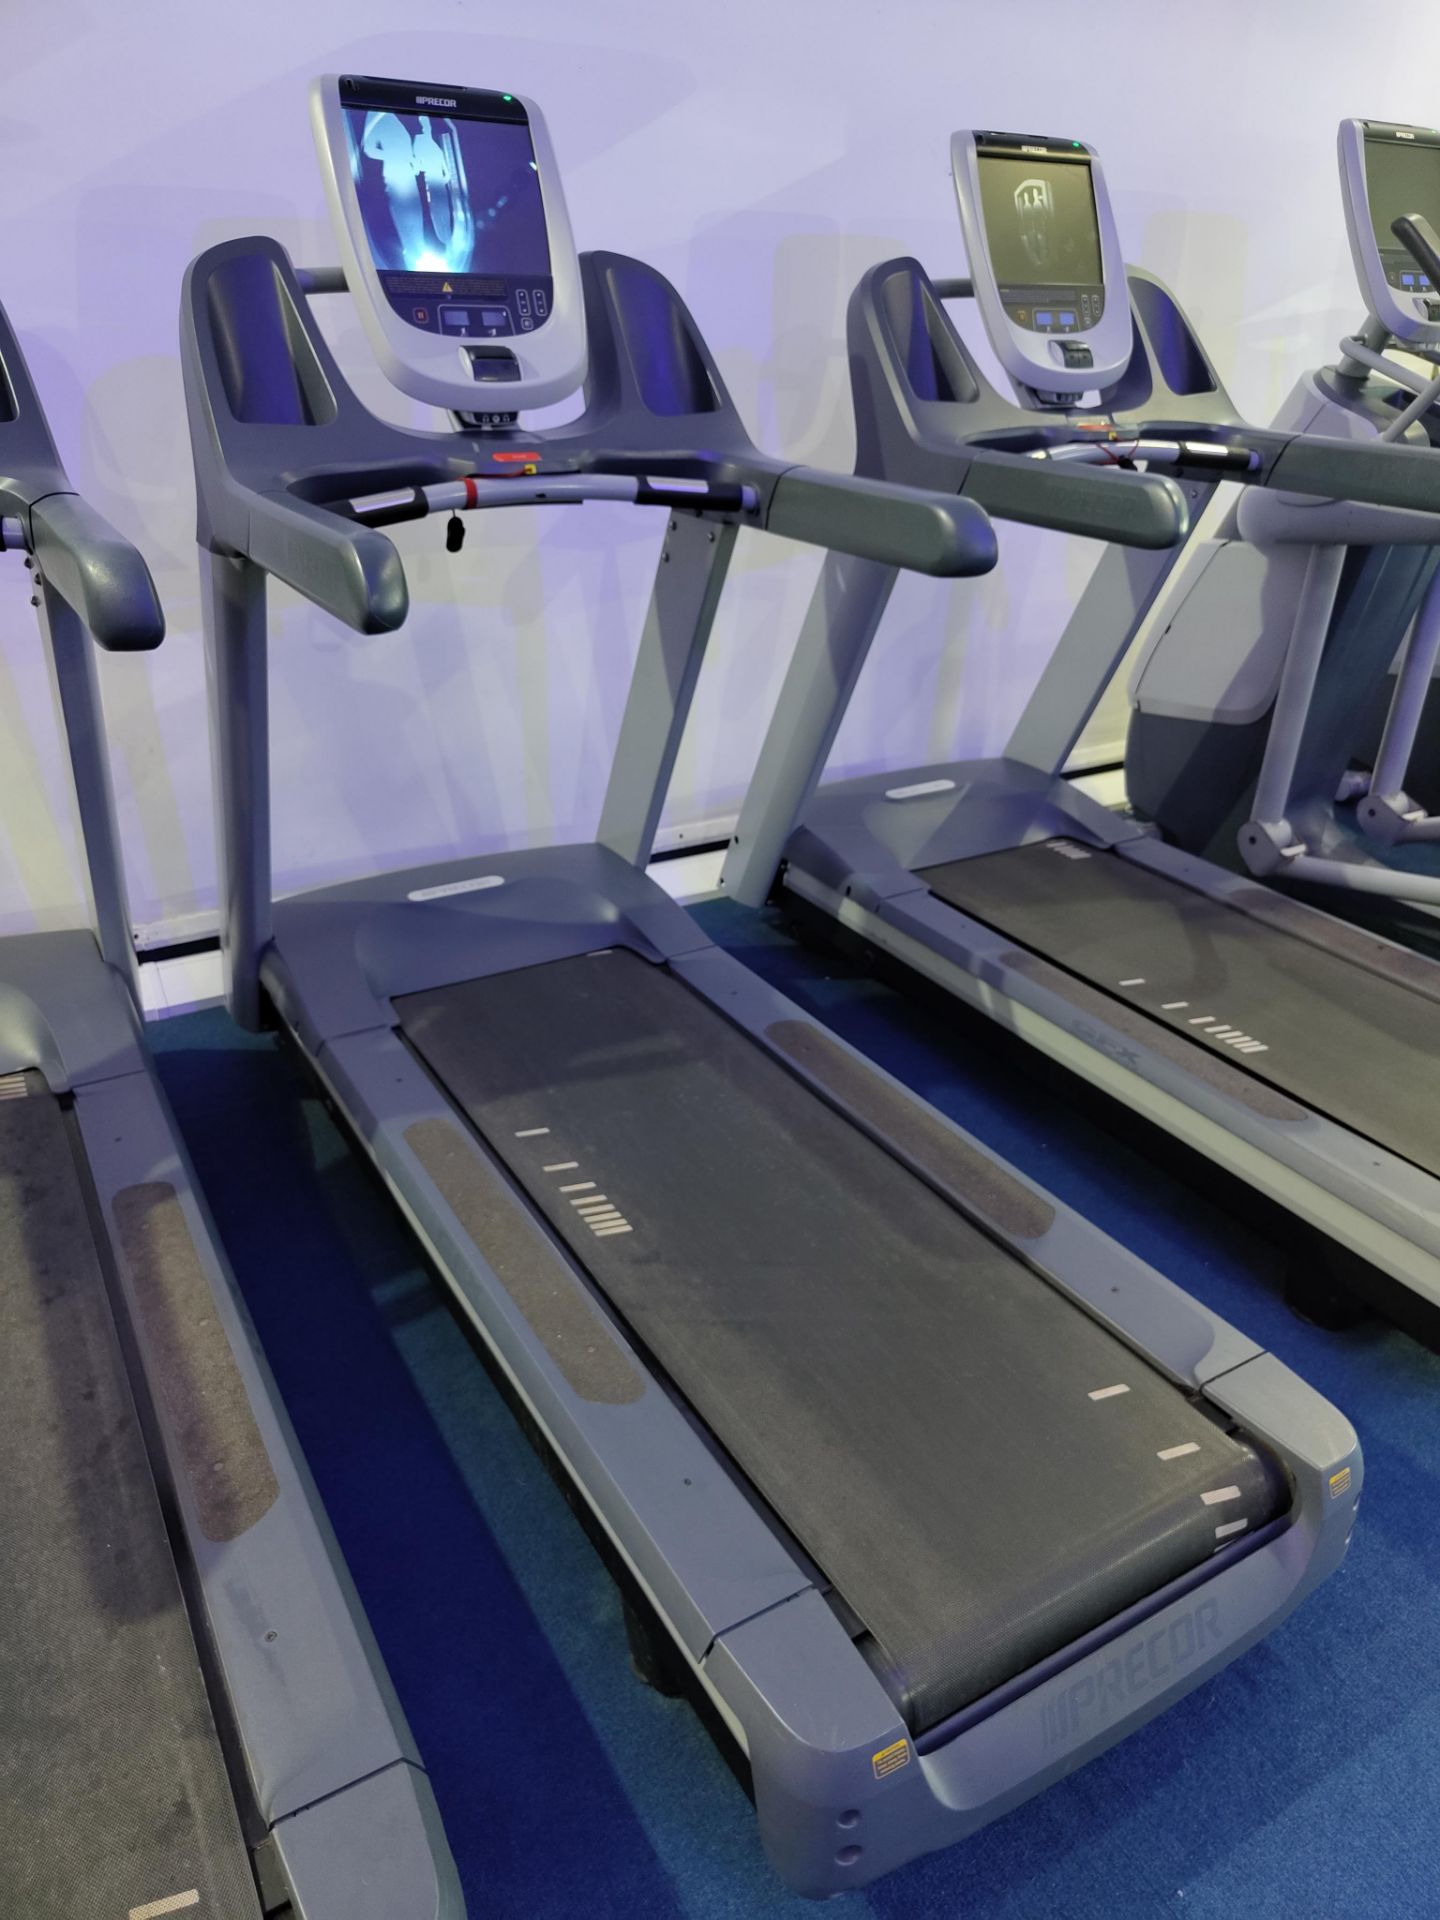 PRECOR TRM 885 Series Treadmill with P80 Console Display - Image 2 of 2